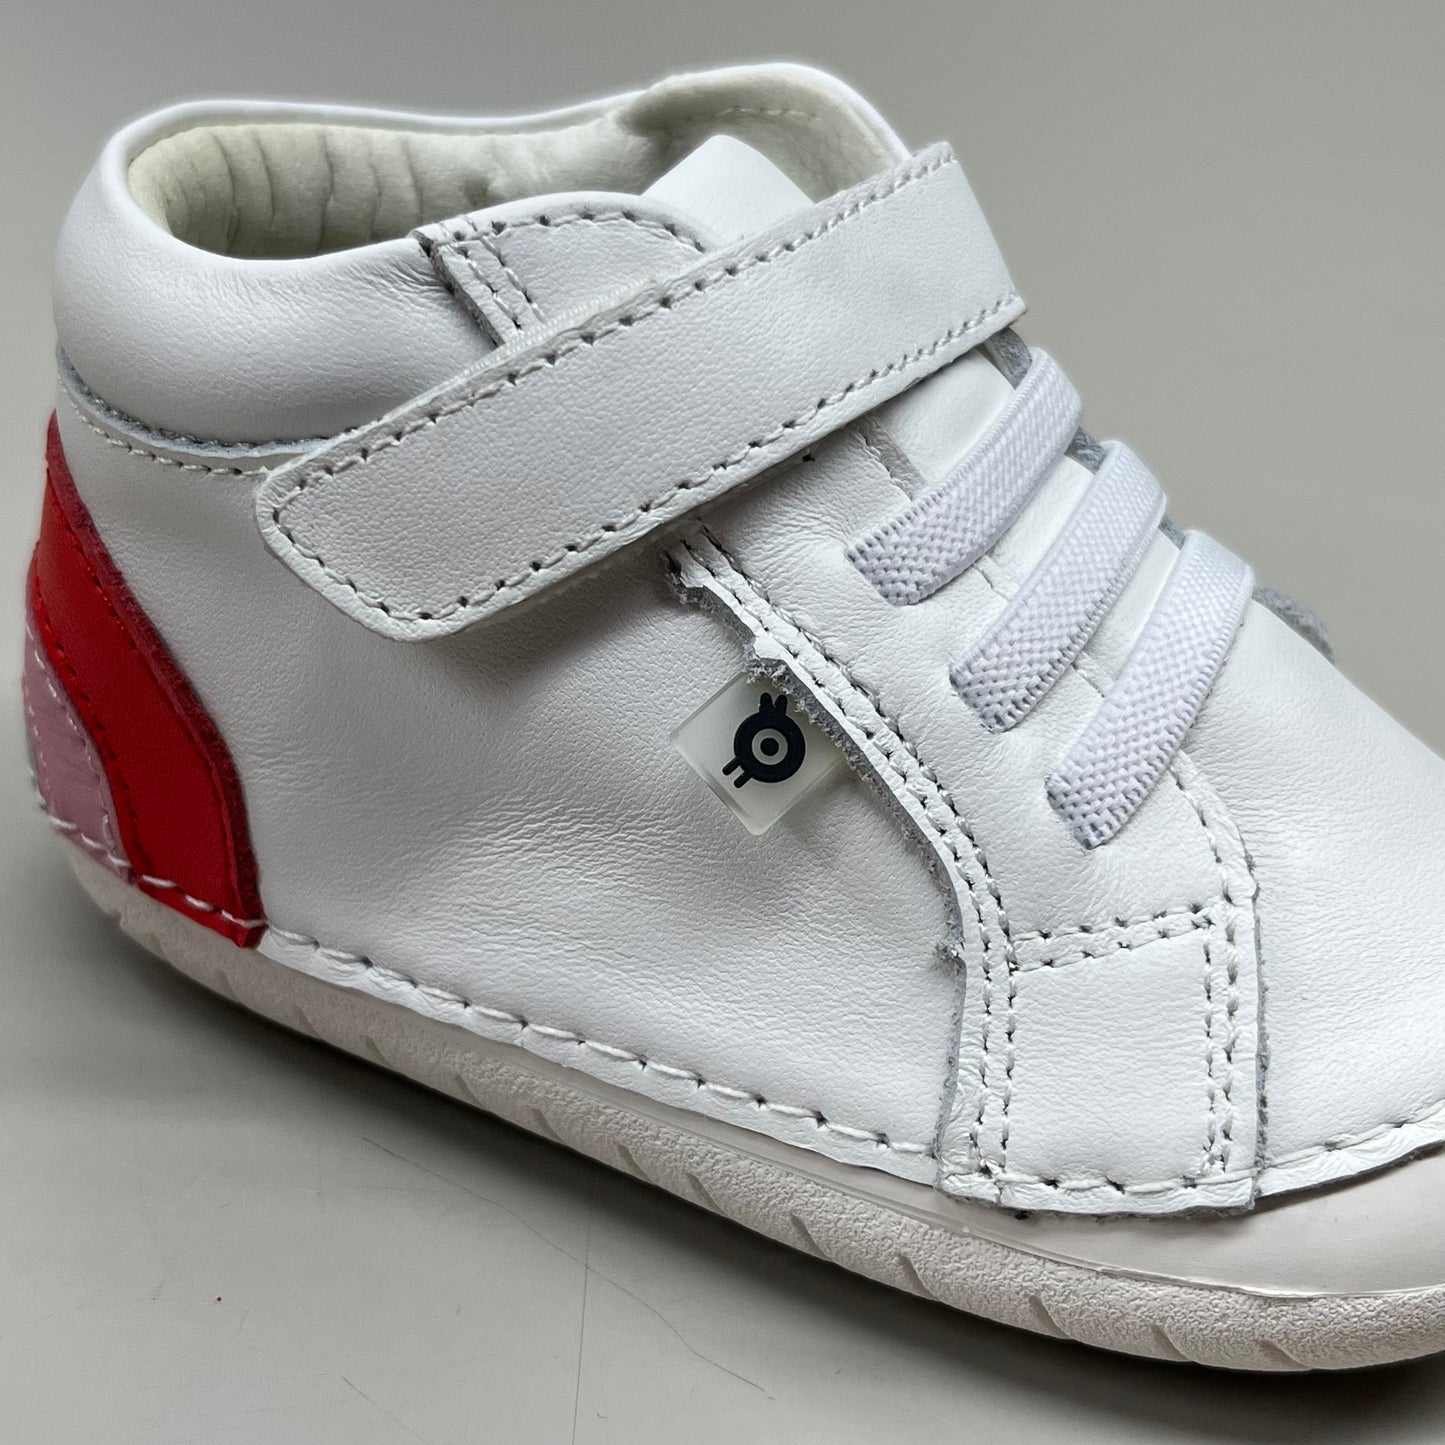 OLD SOLES Baby Champster Leather Shoe Sz 21 US 5 Snow/Red/ Pink/Silver #4091